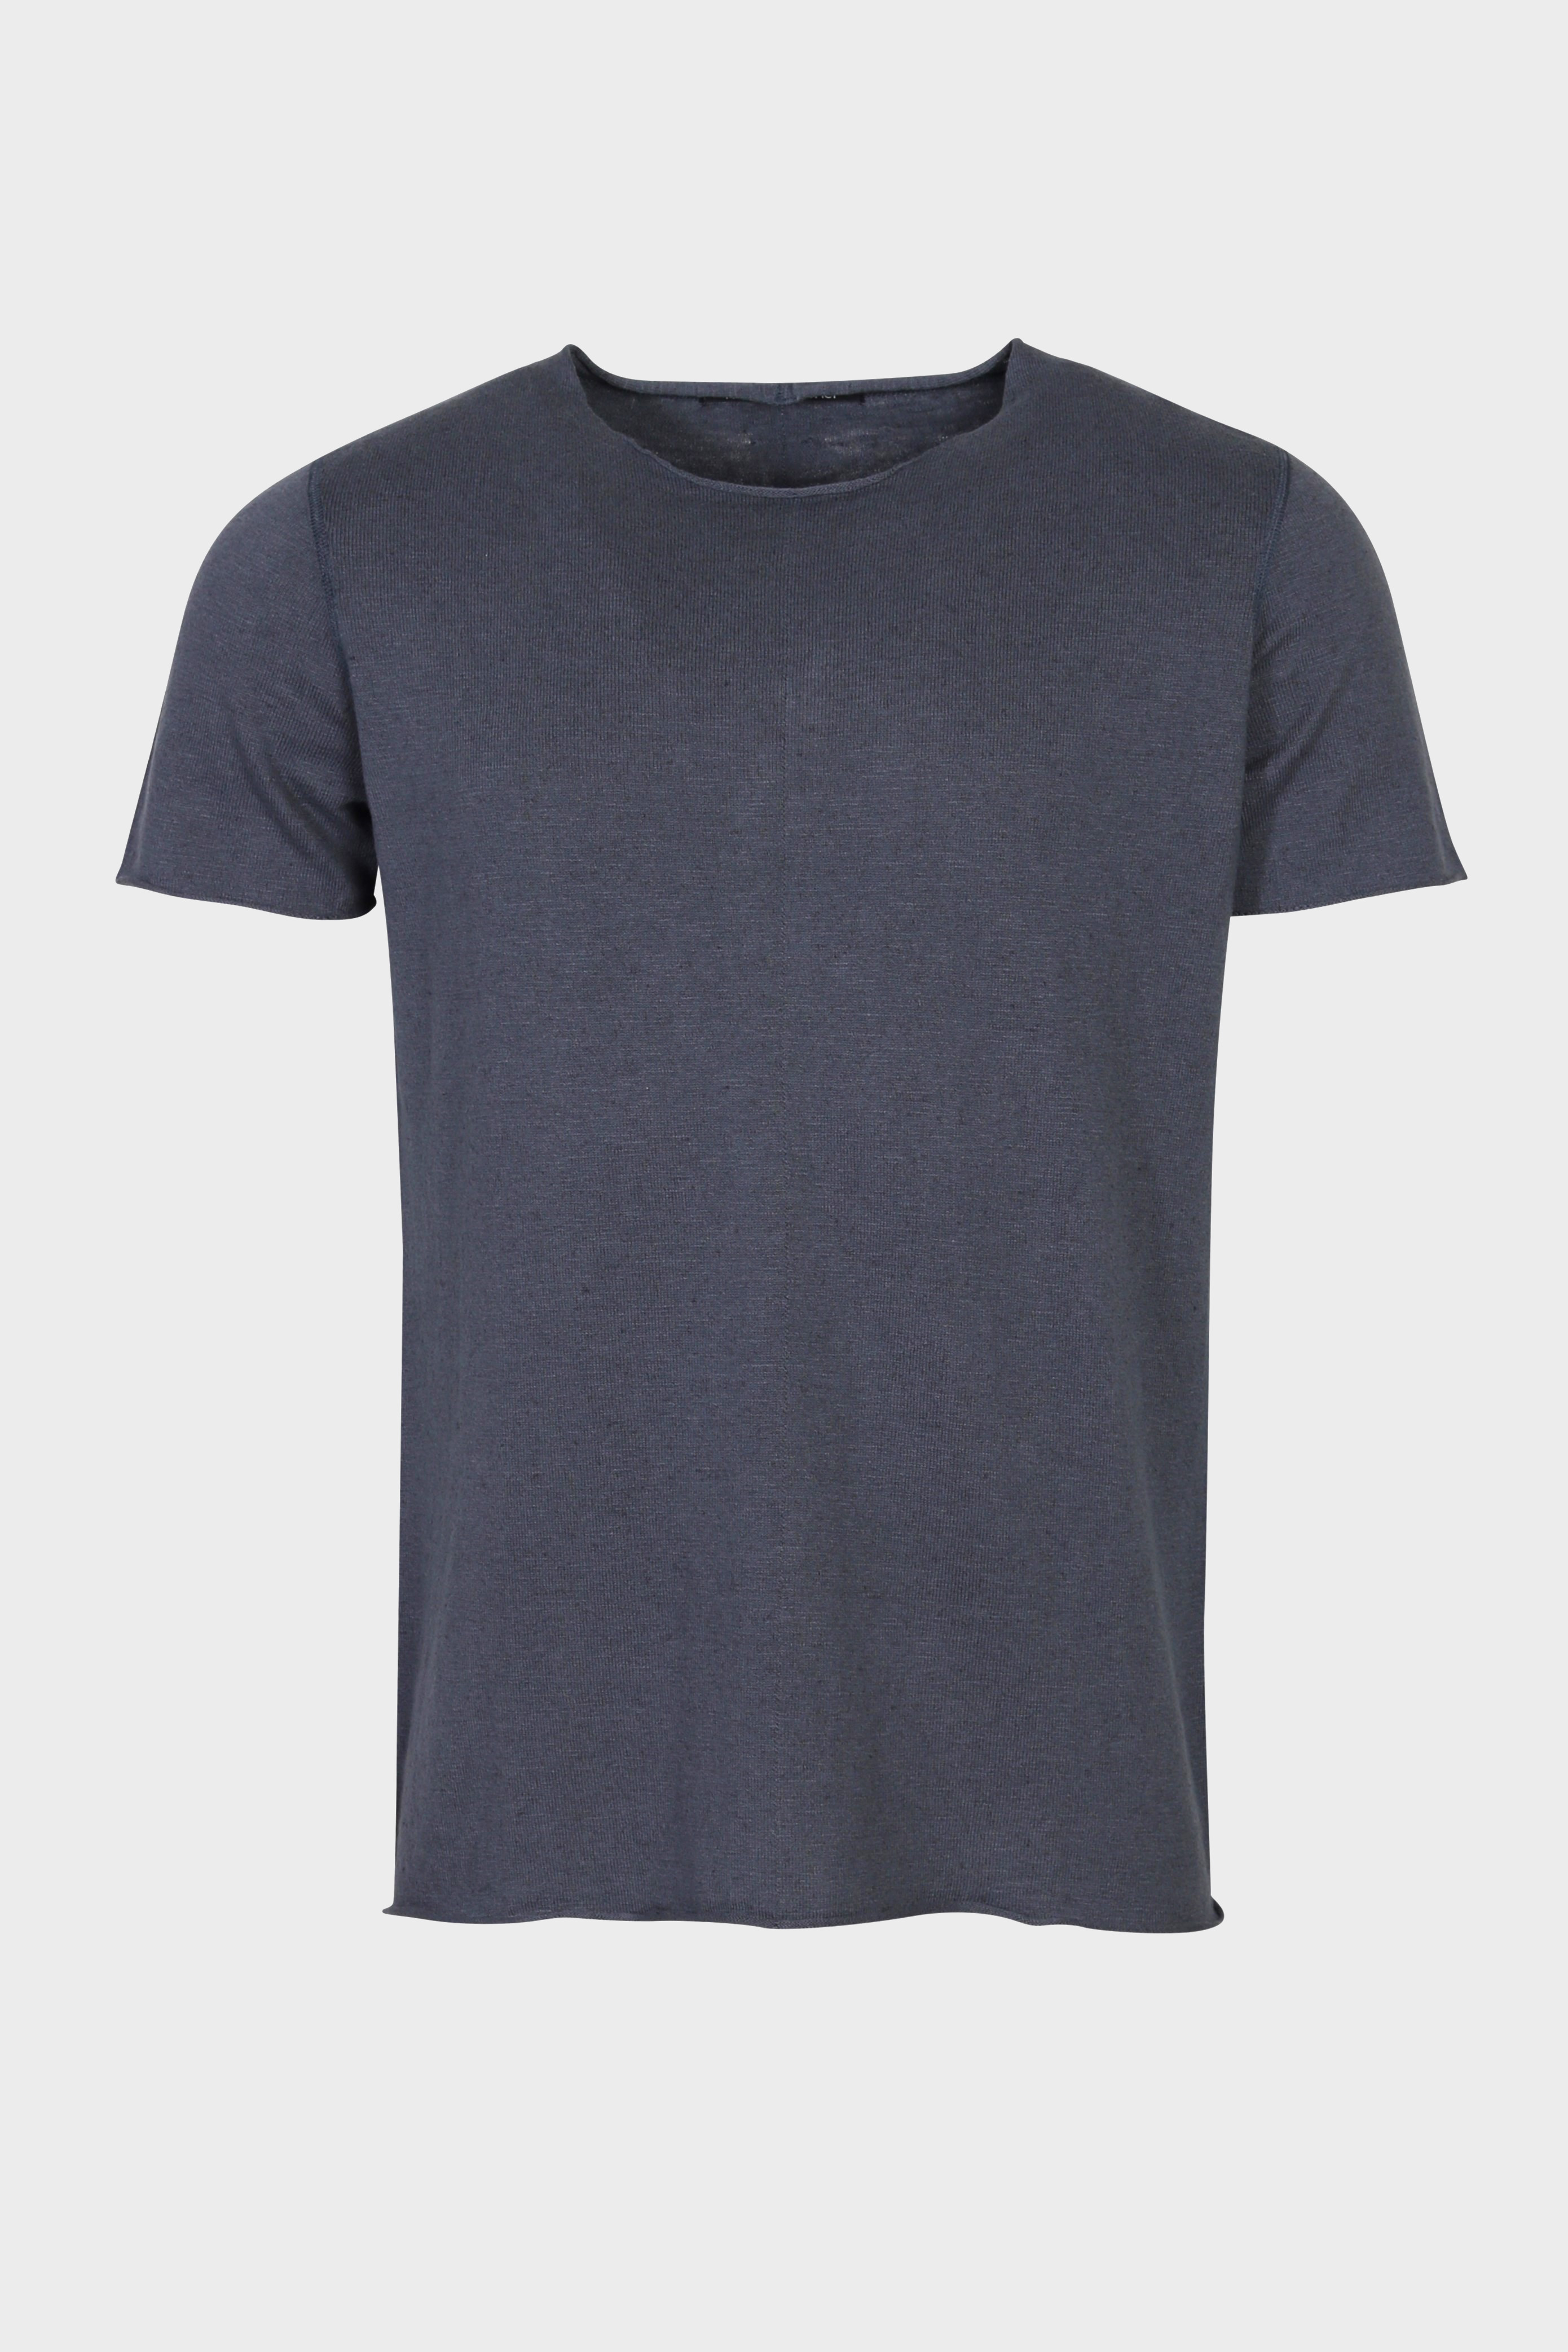 HANNES ROETHER Knit T-Shirt in Greyish Blue